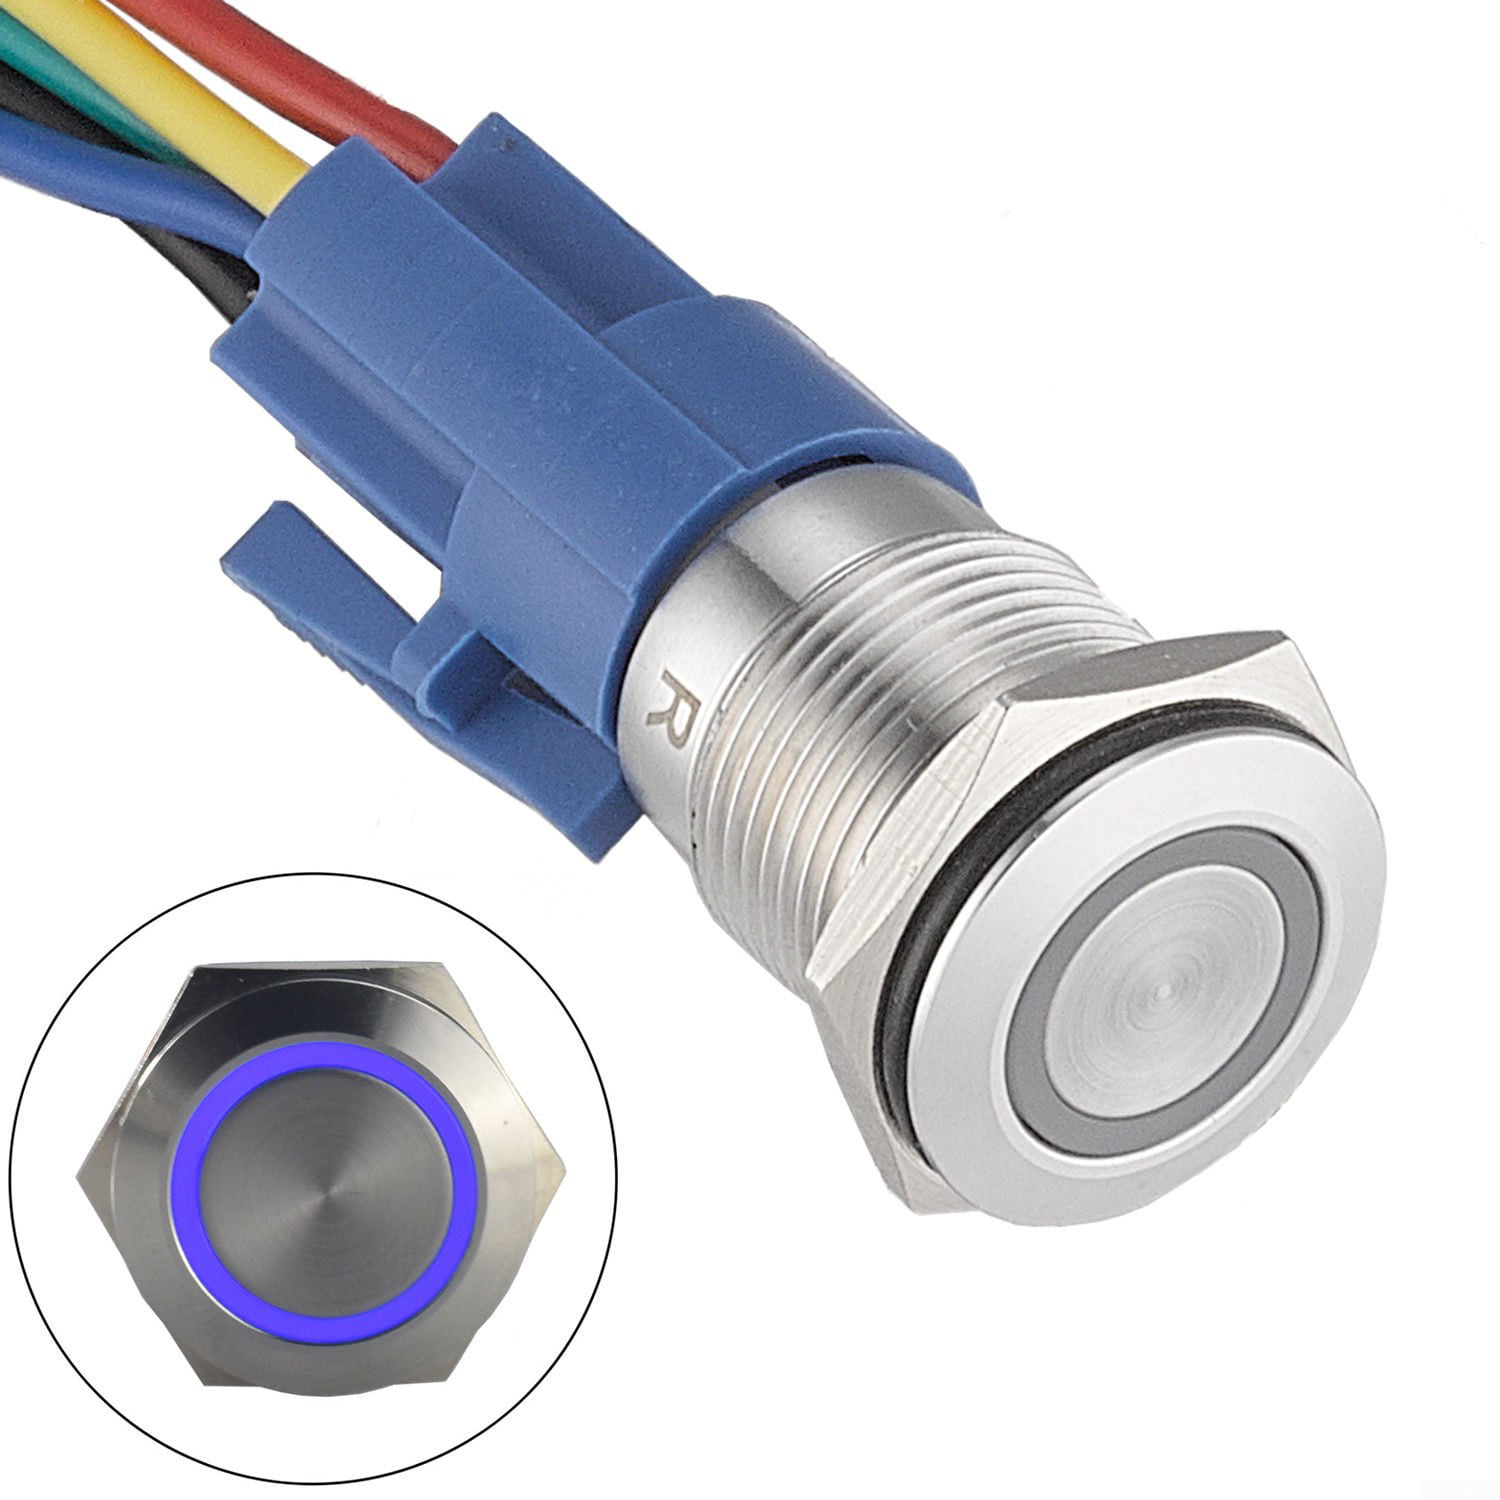 Details about   Latching Metal Push Button Switch 12mm Mounting Dia 1NO 24V Blue LED Light 